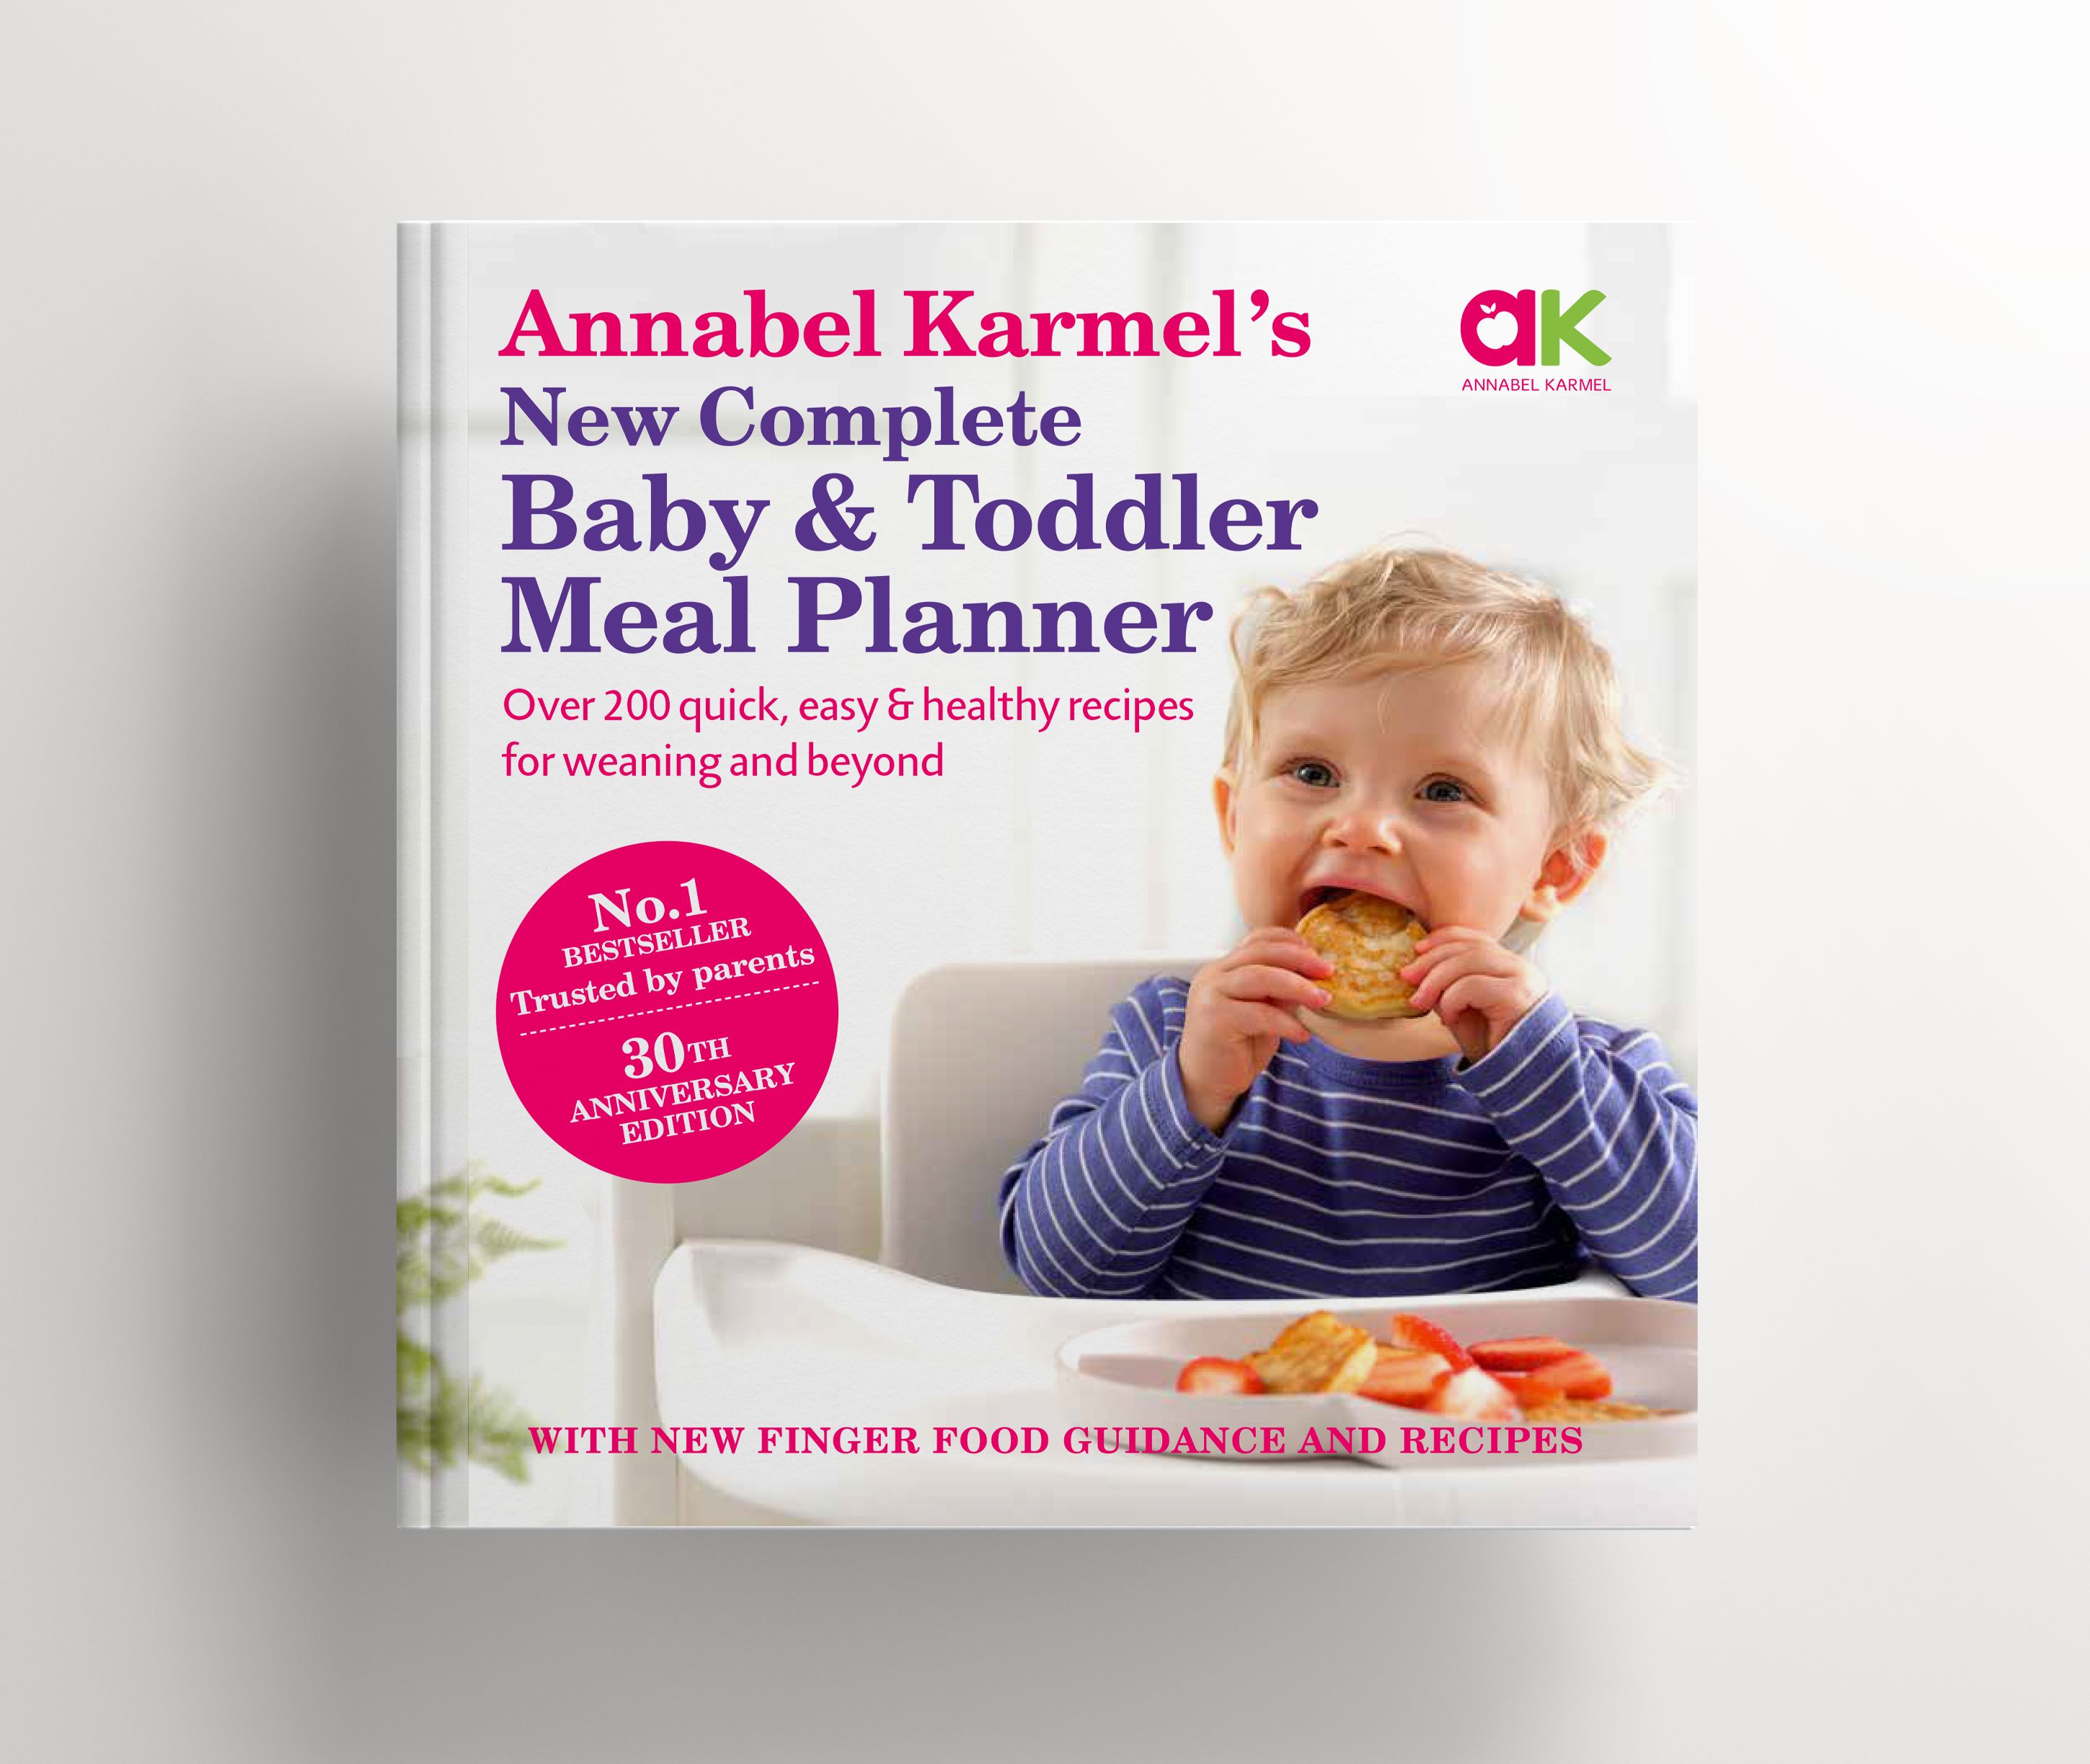 Annabel Karmel Celebrates the 30th Anniversary of her Phenomenally Successful Book: Annabel Karmel's New Complete Baby & Toddler Meal Planner with New Recipes and Latest Guidance